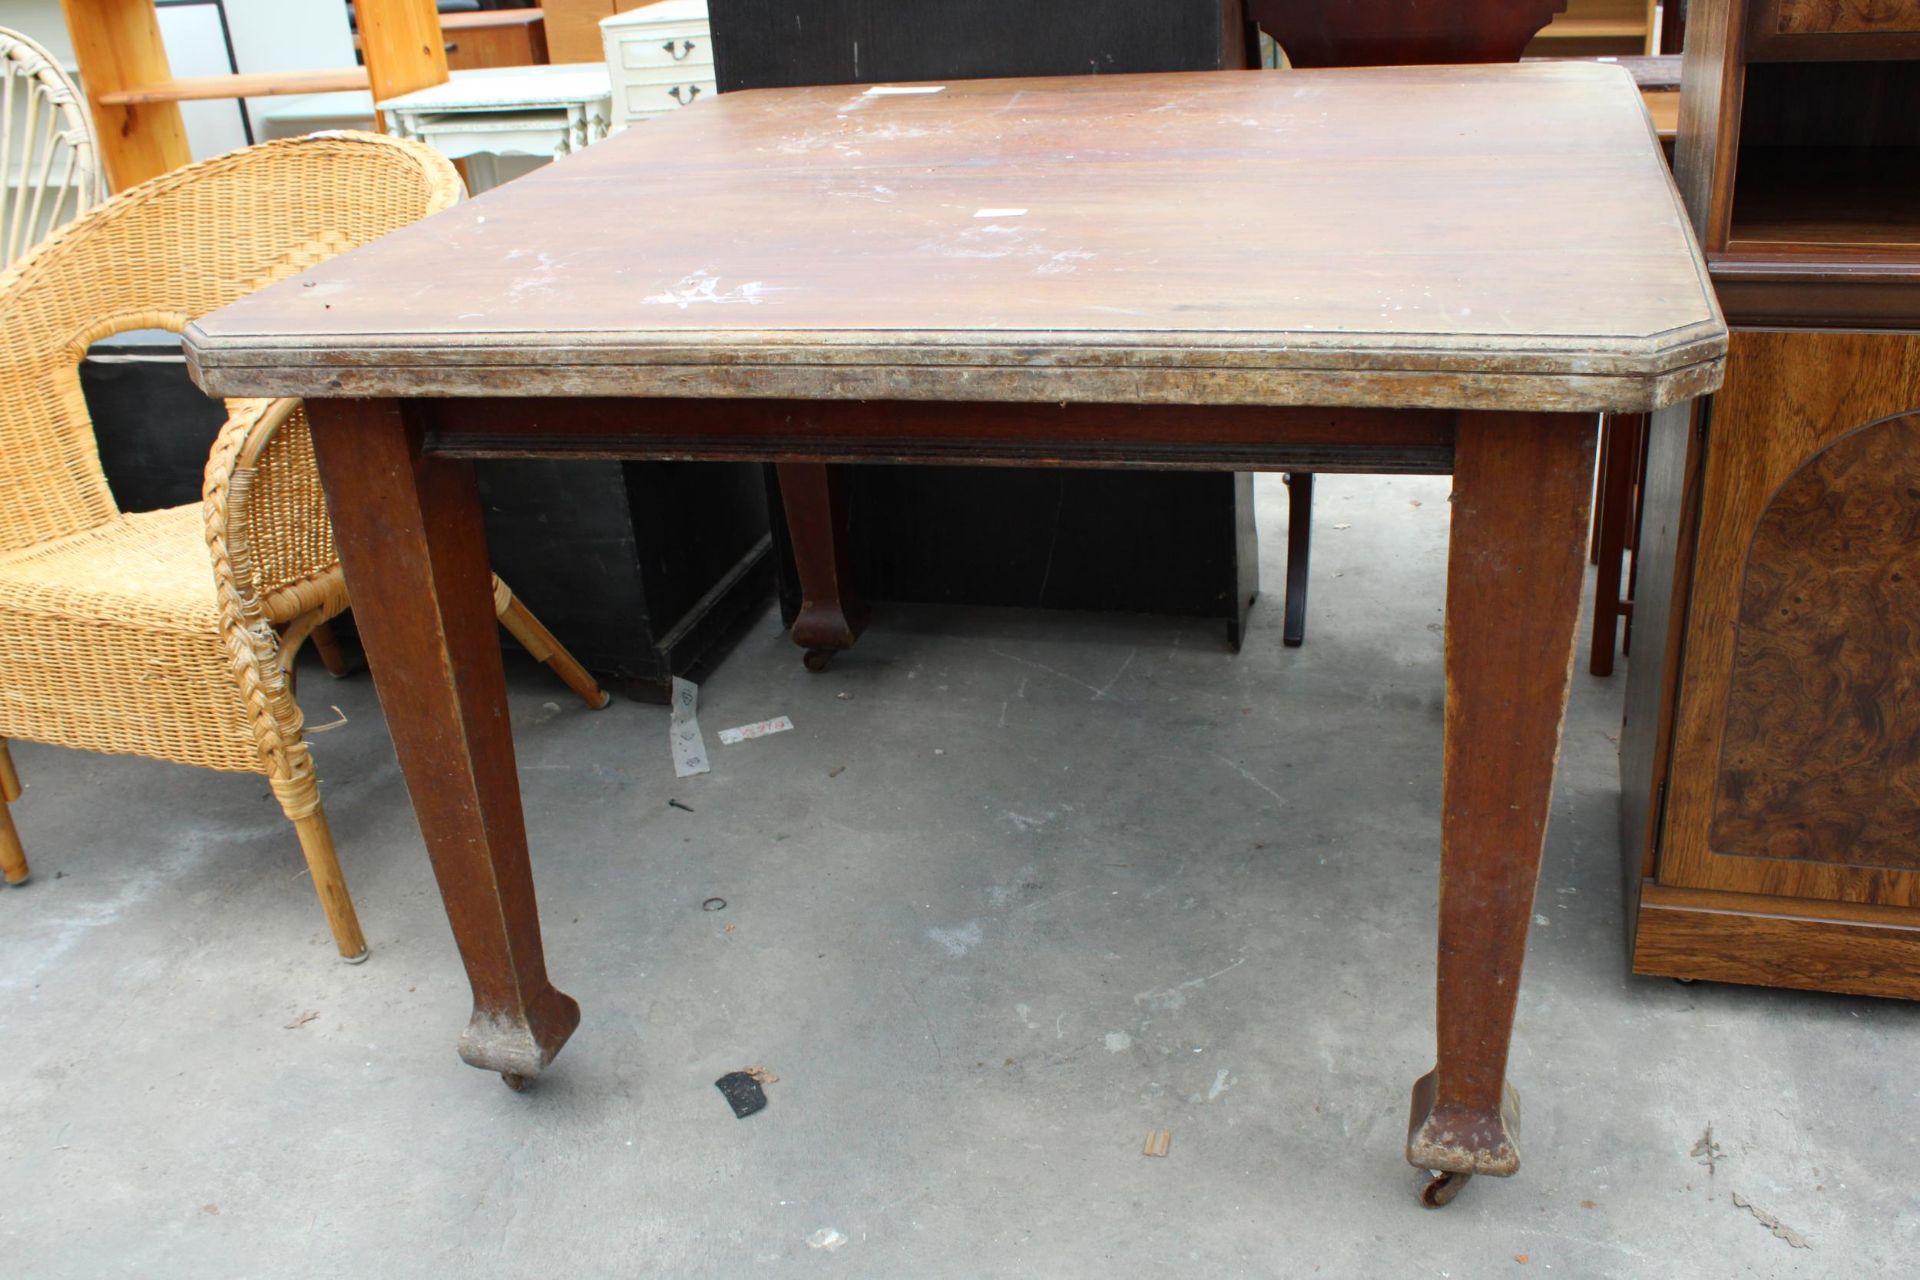 A LATE VICTORIAN WIND-OUT TABLE WITH CANTED CORNERS - Image 2 of 2